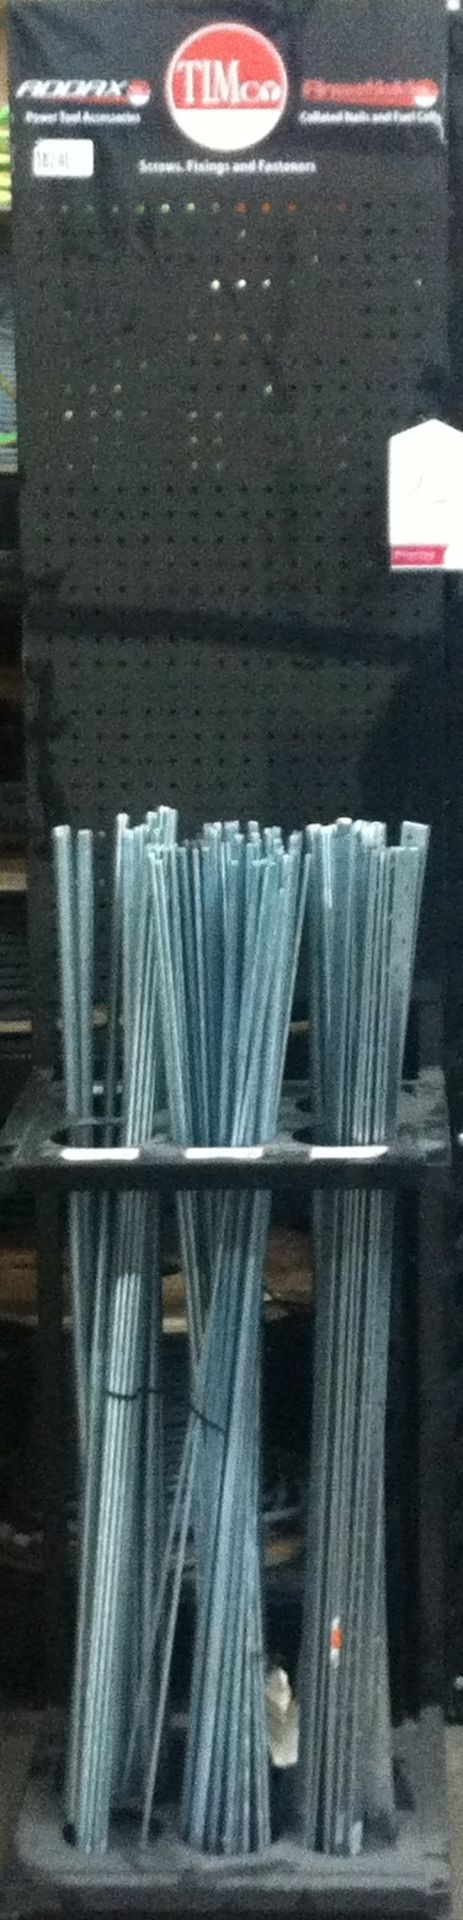 Quantity of Steel Threaded Bars & Brackets w/ Display Stand - Please See Description for Sizes